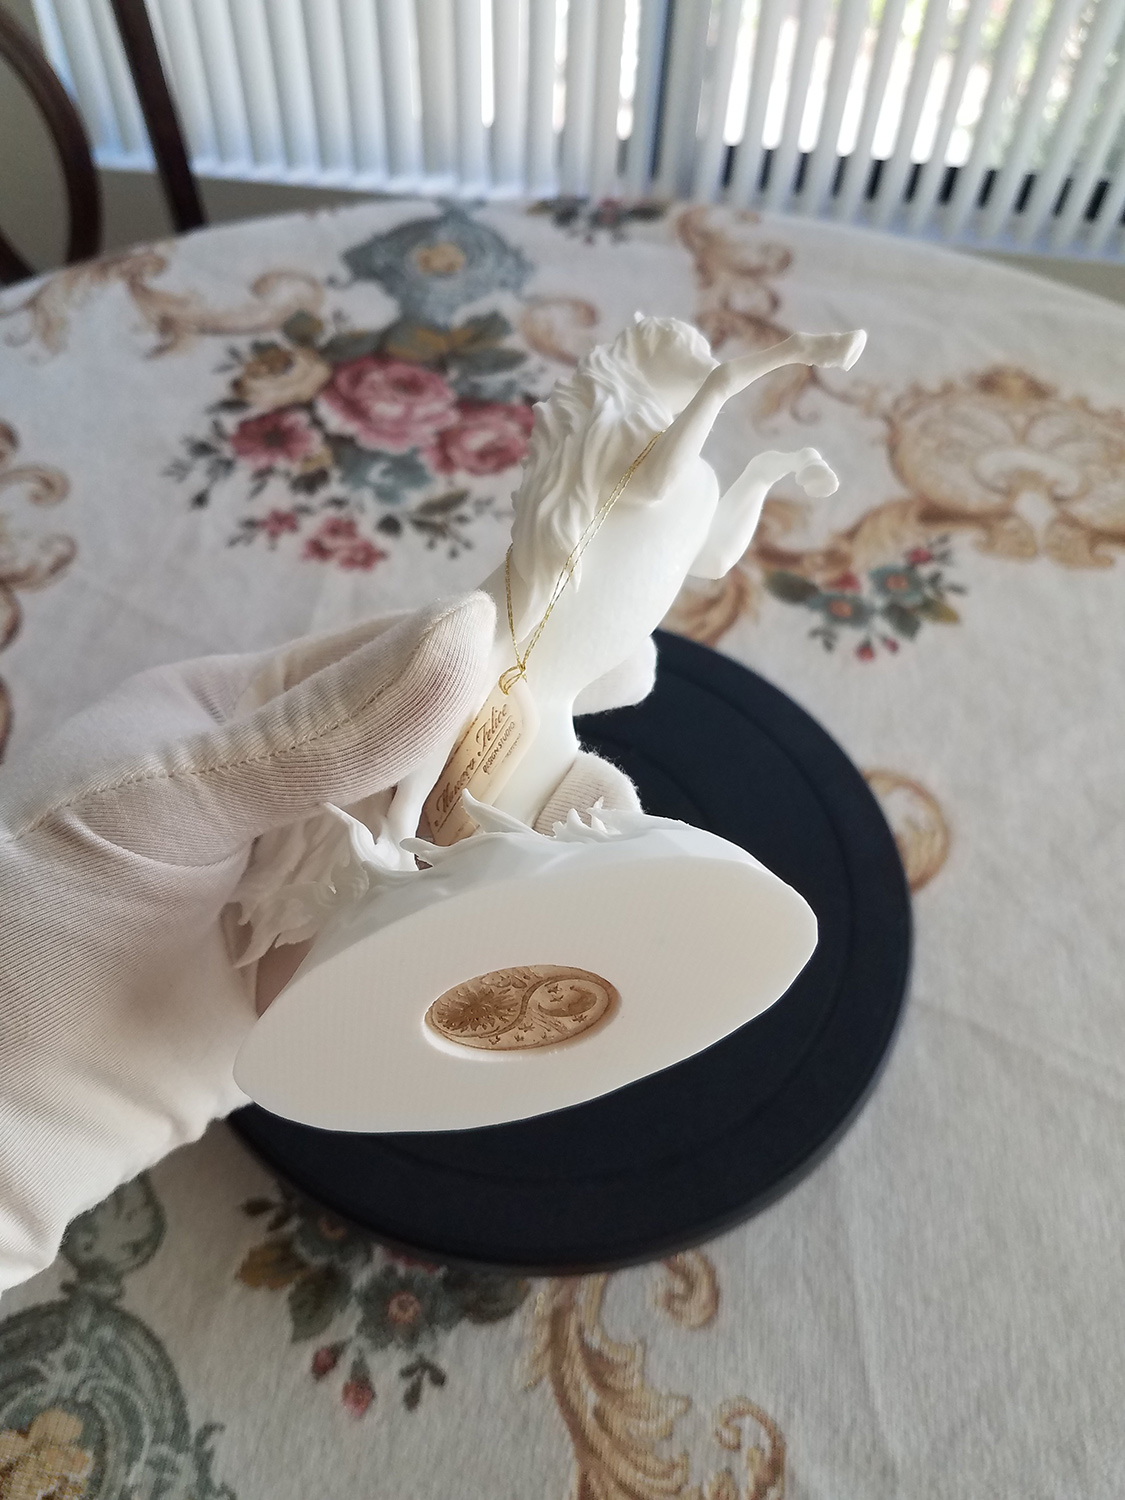 Horse Tabletop Figurine. 3D Printed high-quality sculptures on demand.